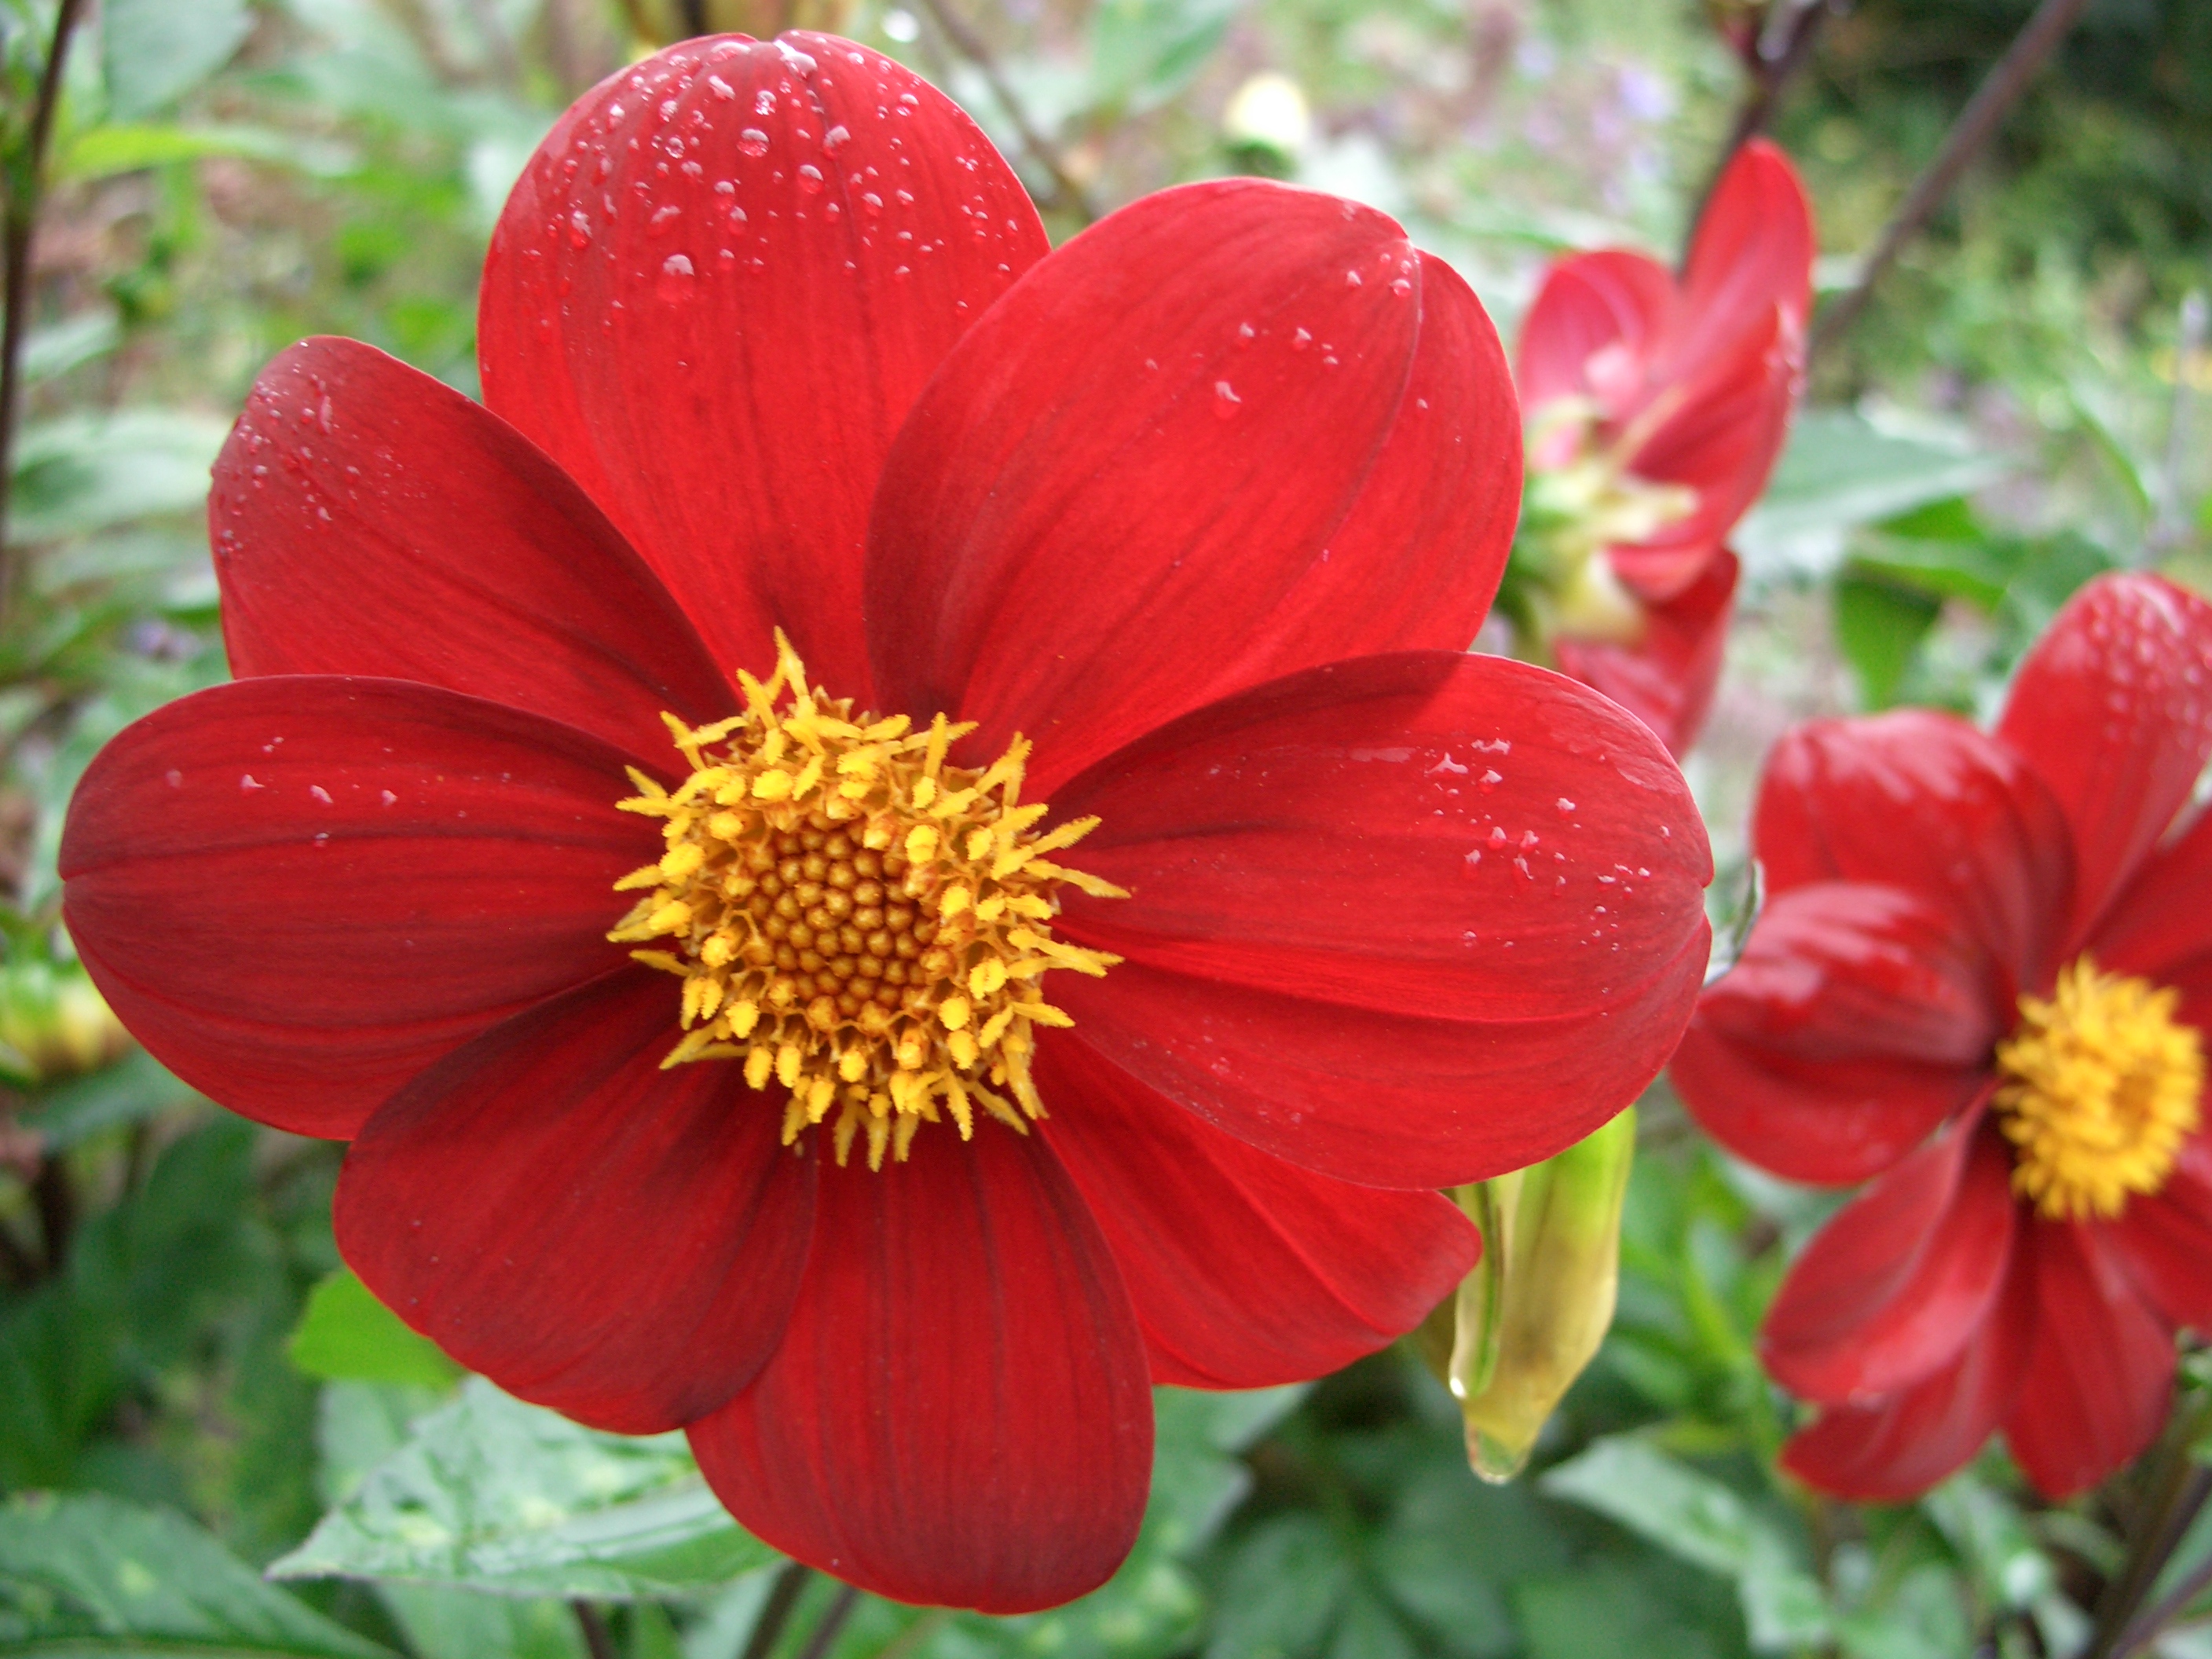 macro image of a red flower with a yellow center